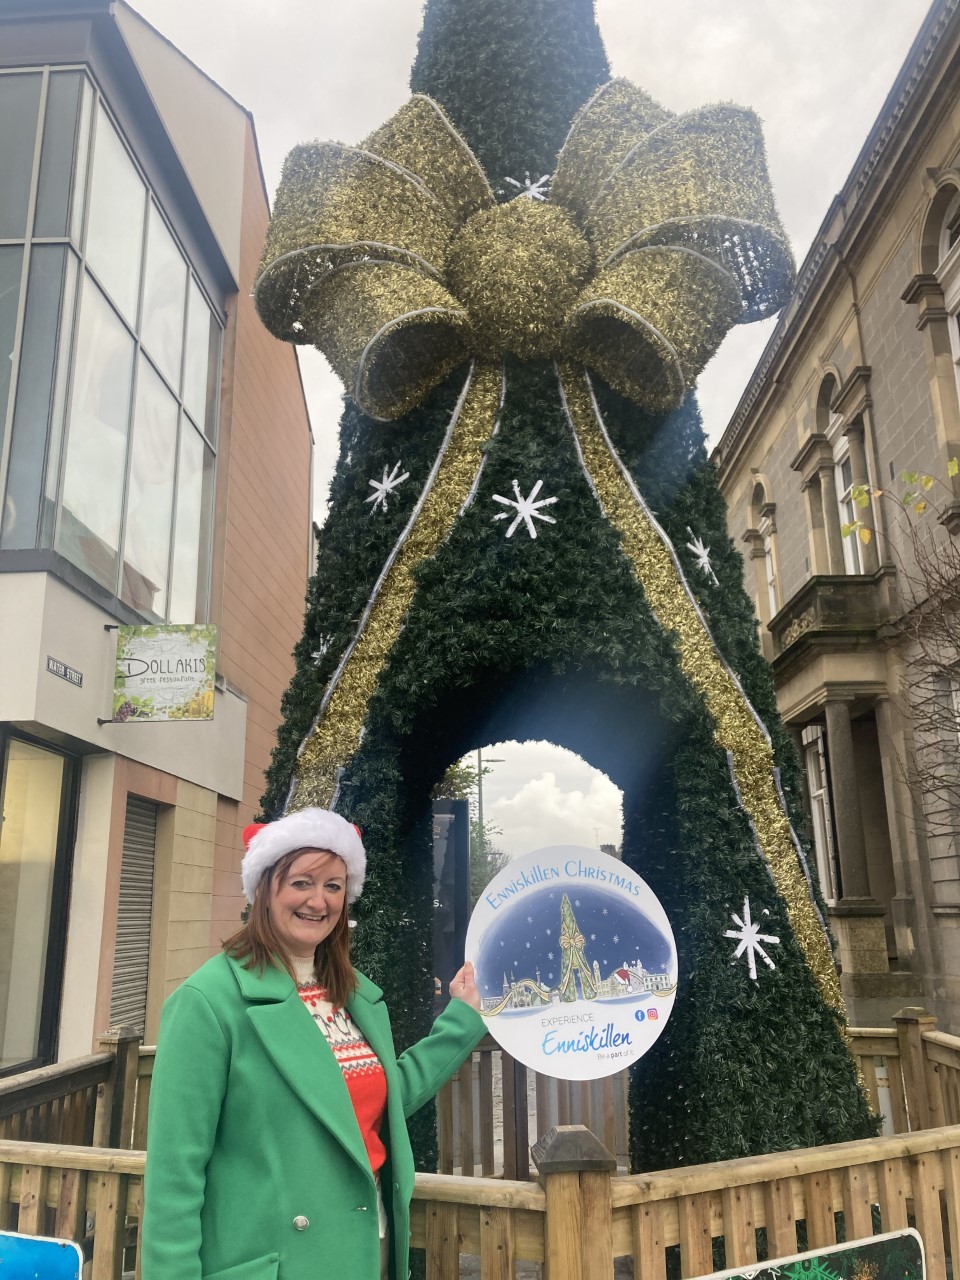 Noelle McAloon, Enniskillen BID manager, pictured with the new Christmas tree at The Diamond, Enniskillen. Photo by Jessica Campbell.